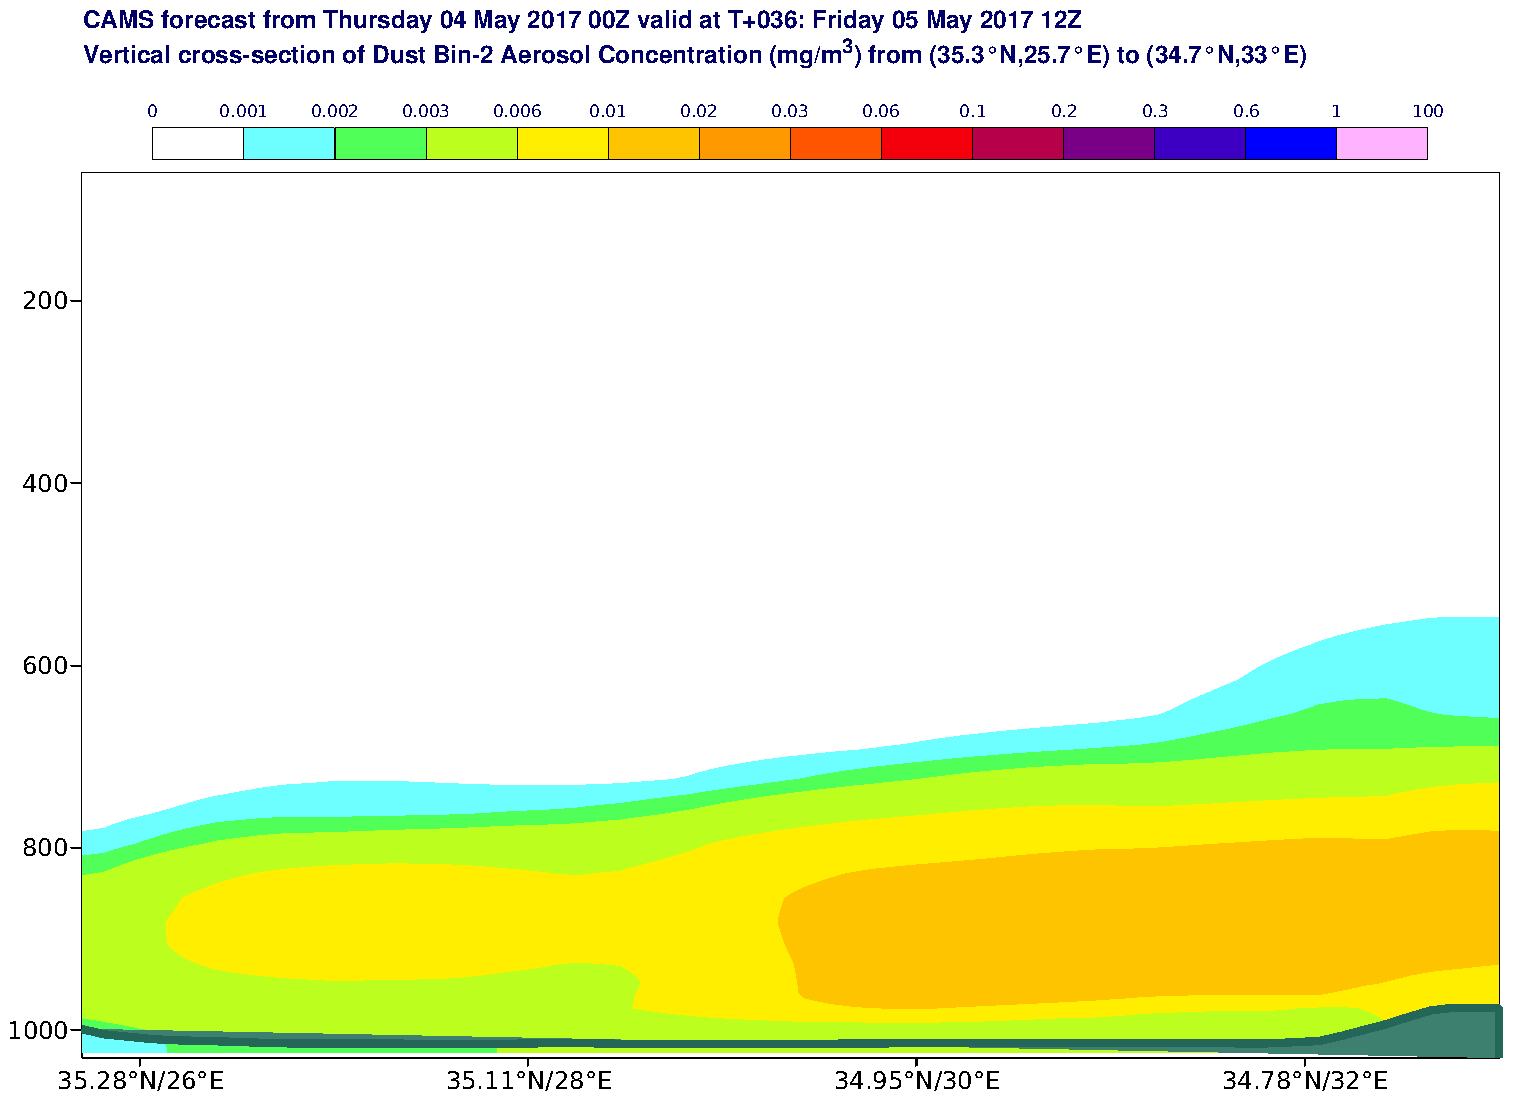 Vertical cross-section of Dust Bin-2 Aerosol Concentration (mg/m3) valid at T36 - 2017-05-05 12:00